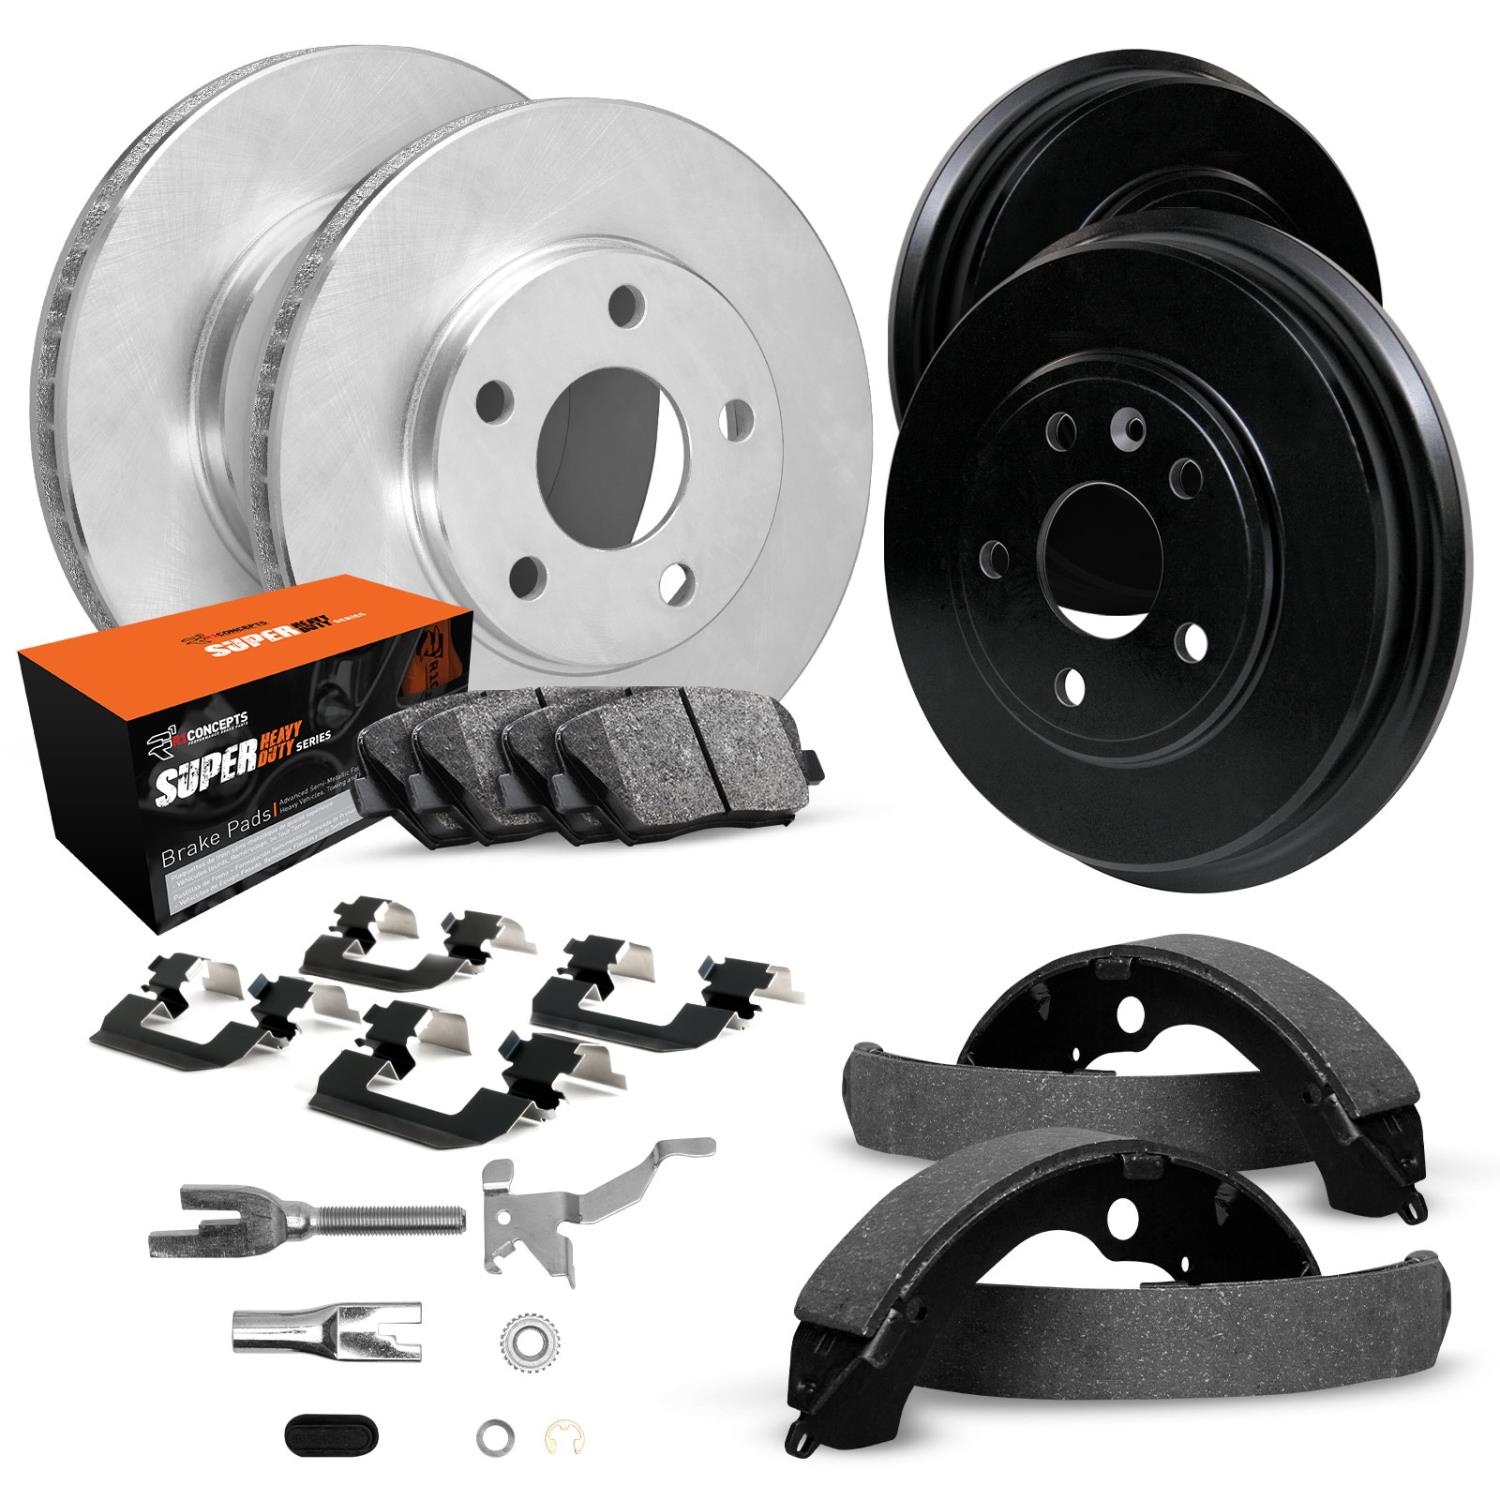 E-Line Blank Brake Rotor & Drum Set w/Super-Duty Pads, Shoes, Hardware, & Adjusters, 1974-1974 GM, Position: Front & Rear